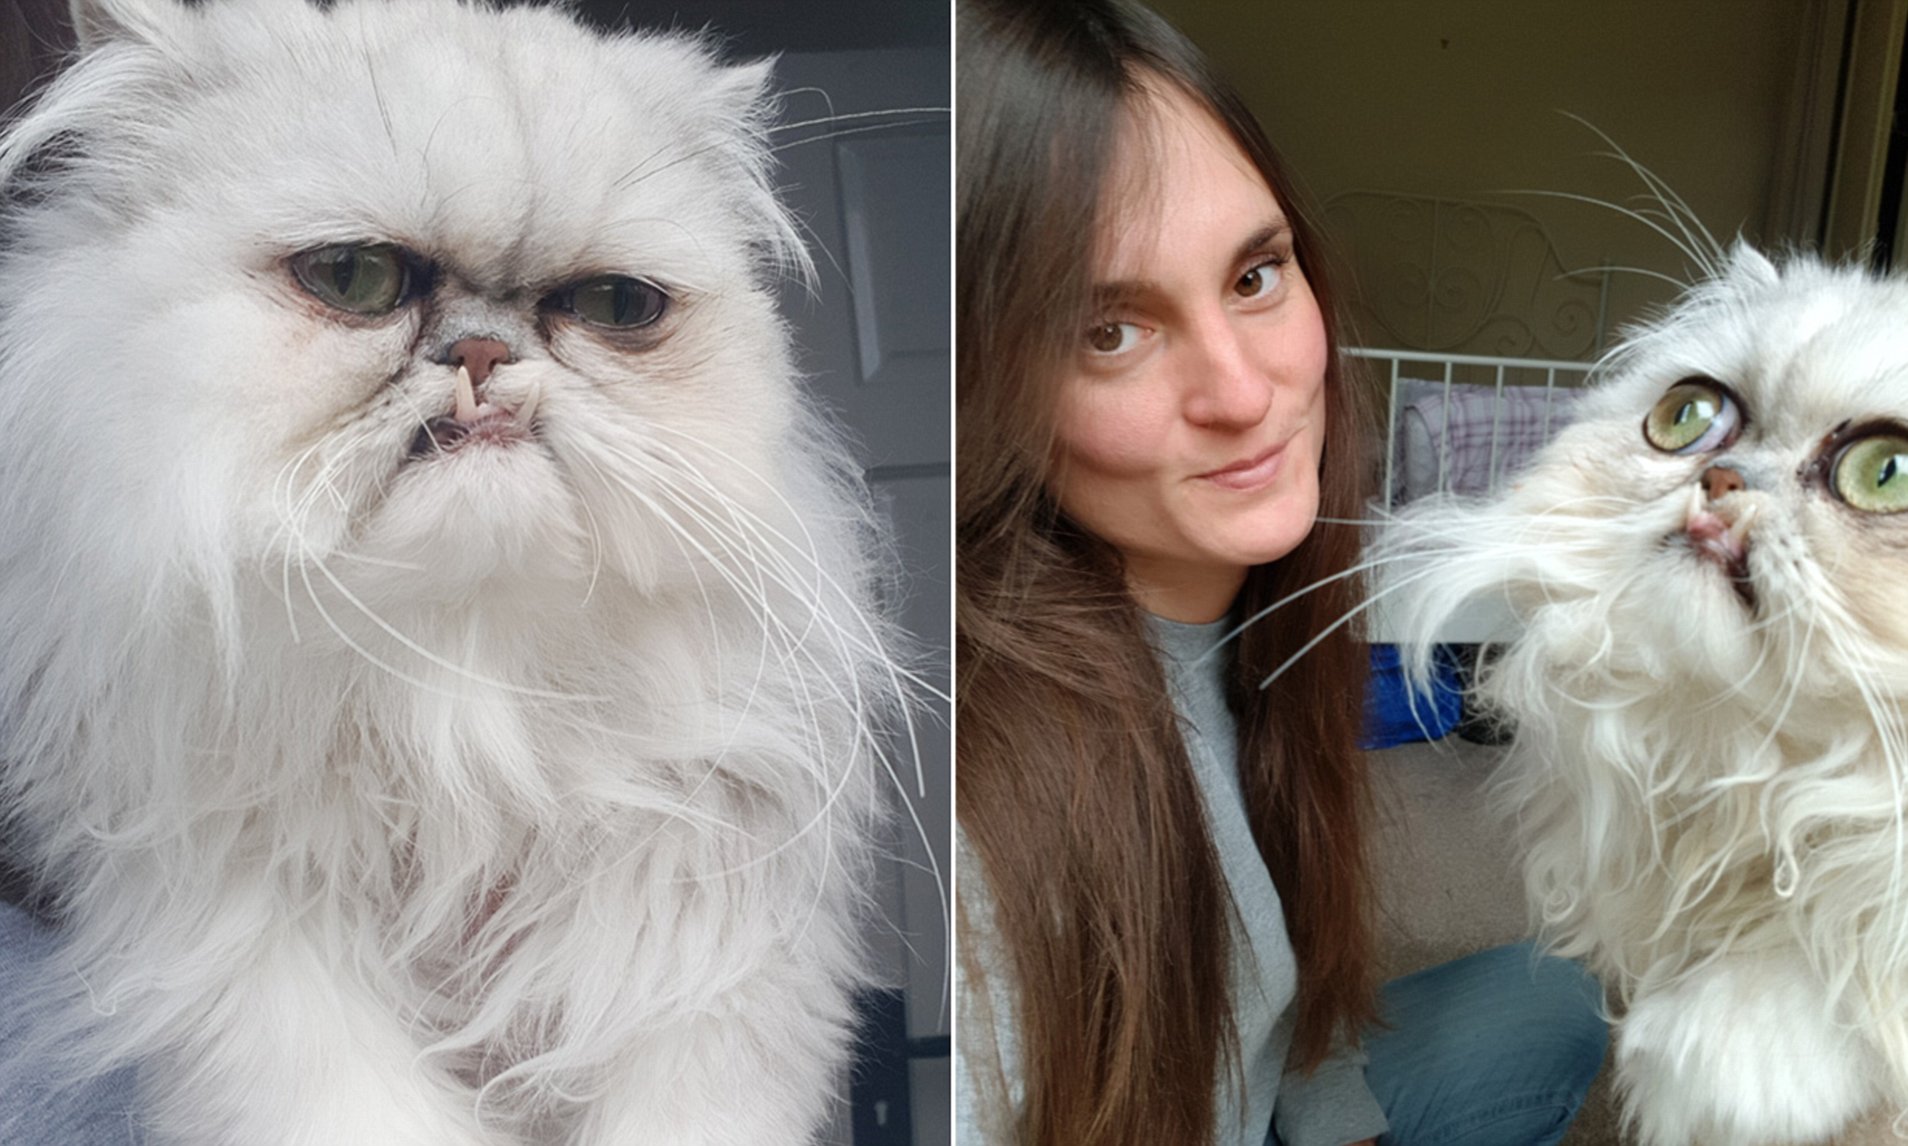 A white Persian cat named Wilfred chinchilla with his owner who is wearing a grey shirt